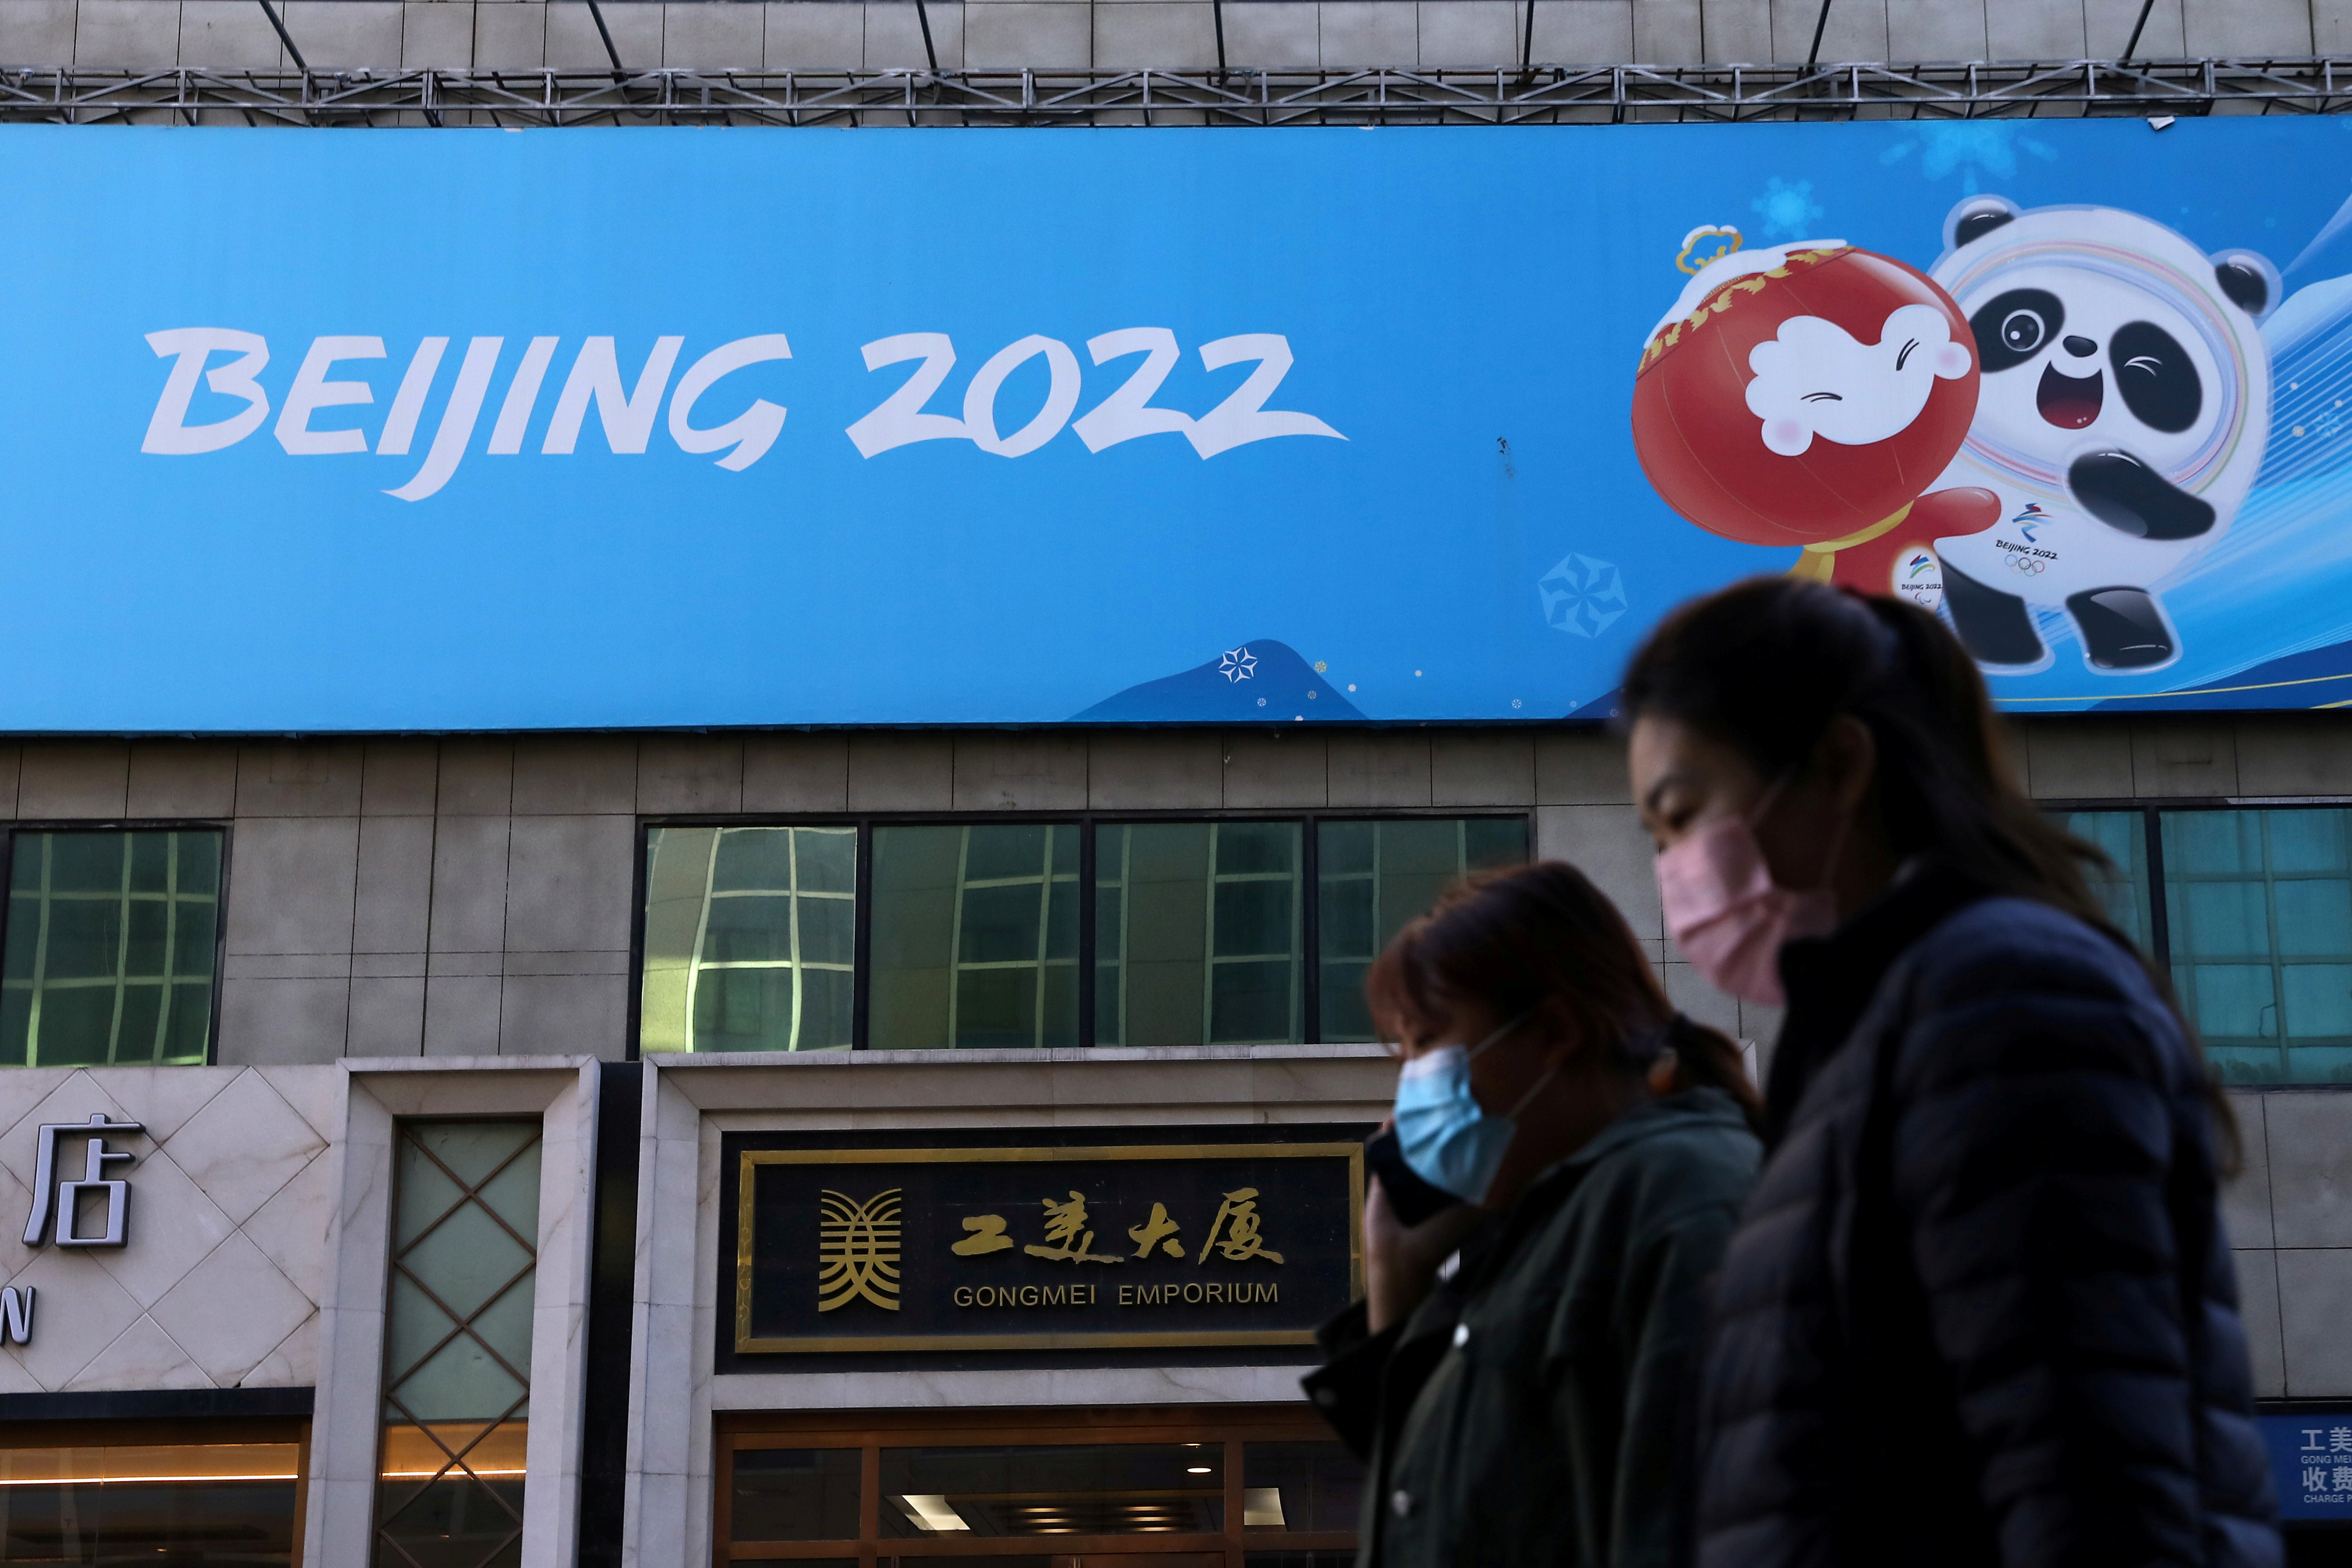 Beijing marks 100 days to the opening of Beijing 2022 Winter Olympics